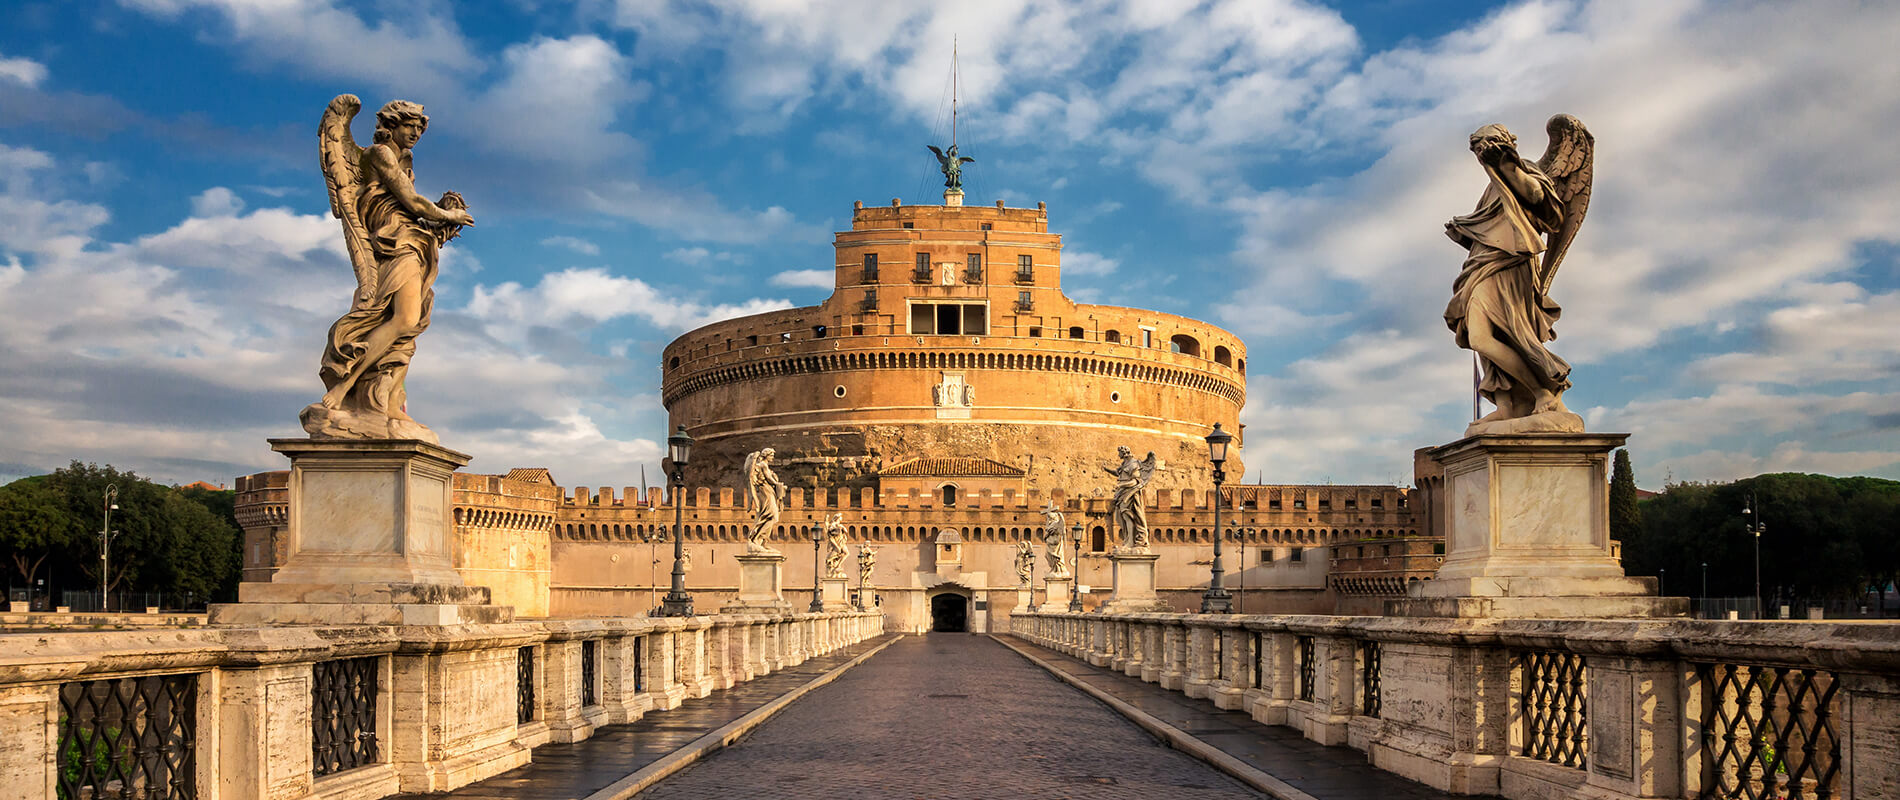 Castel Sant'Angelo: the storied citadel of the eternal city